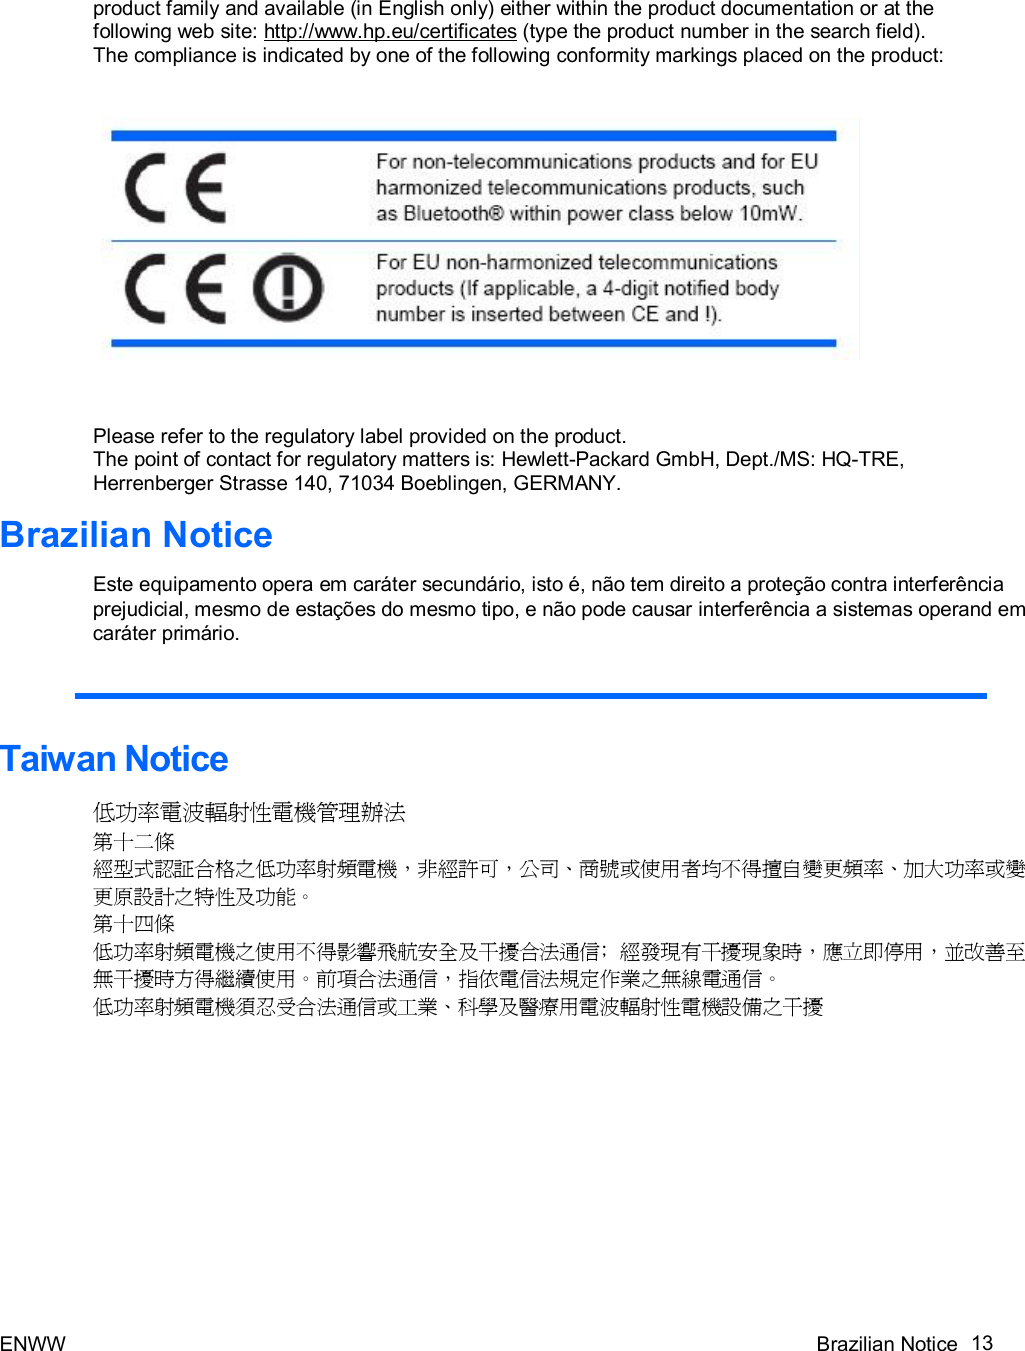 ENWW Brazilian Notice 13   product family and available (in English only) either within the product documentation or at the following web site: http://www.hp.eu/certificates (type the product number in the search field). The compliance is indicated by one of the following conformity markings placed on the product:      Please refer to the regulatory label provided on the product. The point of contact for regulatory matters is: Hewlett-Packard GmbH, Dept./MS: HQ-TRE, Herrenberger Strasse 140, 71034 Boeblingen, GERMANY.  Brazilian Notice  Este equipamento opera em caráter secundário, isto é, não tem direito a proteção contra interferência prejudicial, mesmo de estações do mesmo tipo, e não pode causar interferência a sistemas operand em caráter primário.    Taiwan Notice  低功率電波輻射性電機管理辦法 第十二條 經型式認証合格之低功率射頻電機，非經許可，公司、商號或使用者均不得擅自變更頻率、加大功率或變更原設計之特性及功能。 第十四條 低功率射頻電機之使用不得影響飛航安全及干擾合法通信﹔經發現有干擾現象時，應立即停用，並改善至無干擾時方得繼續使用。前項合法通信，指依電信法規定作業之無線電通信。 低功率射頻電機須忍受合法通信或工業、科學及醫療用電波輻射性電機設備之干擾  